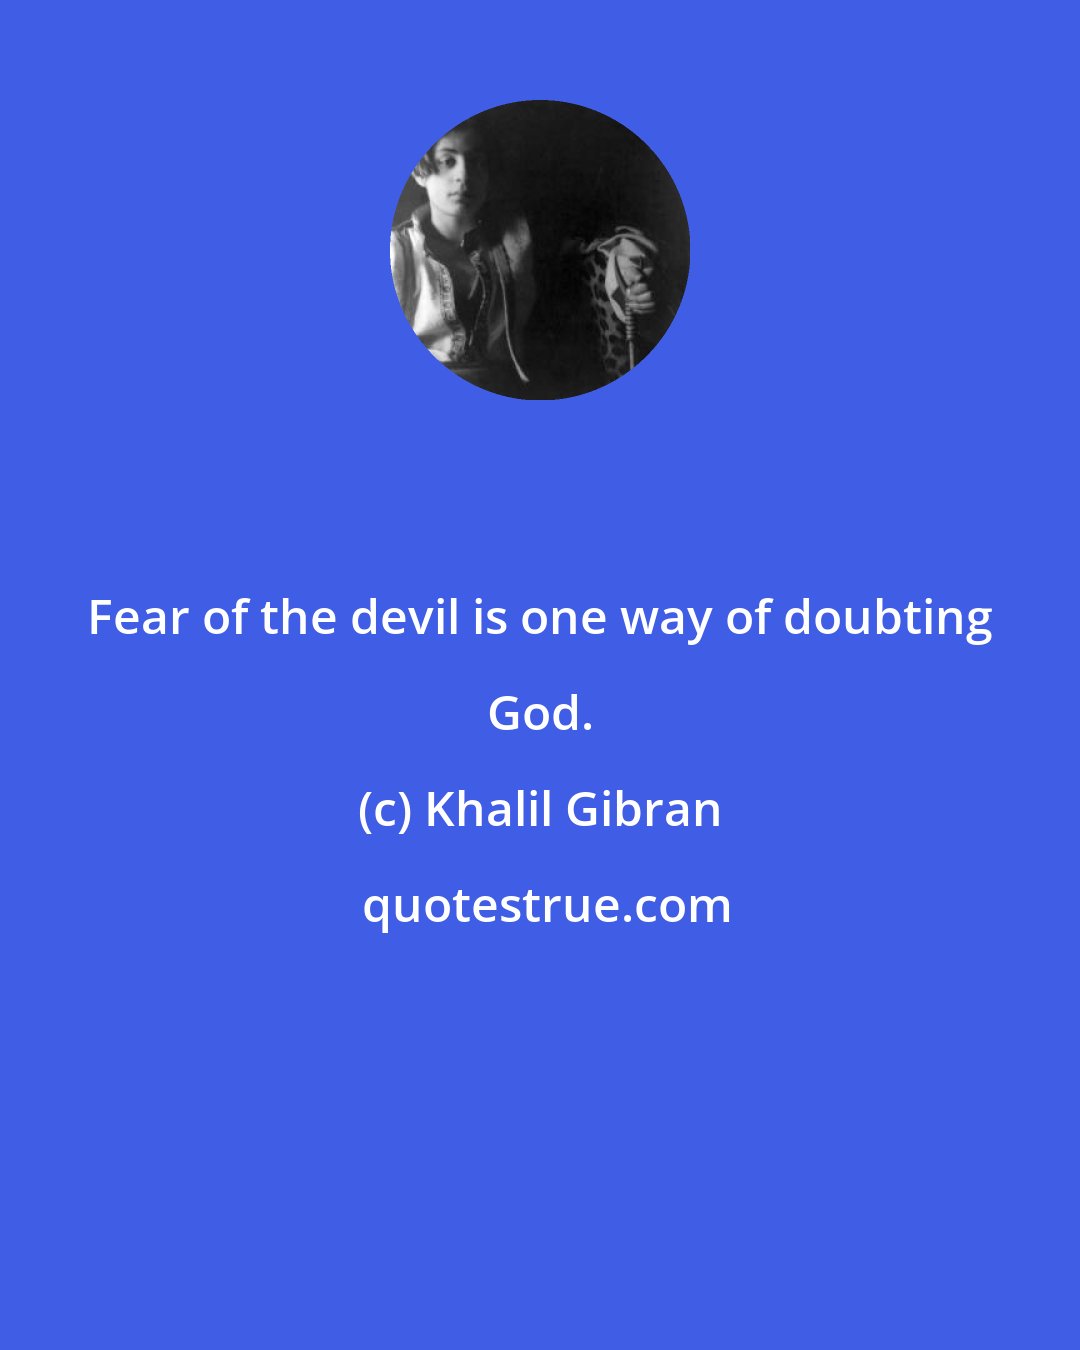 Khalil Gibran: Fear of the devil is one way of doubting God.